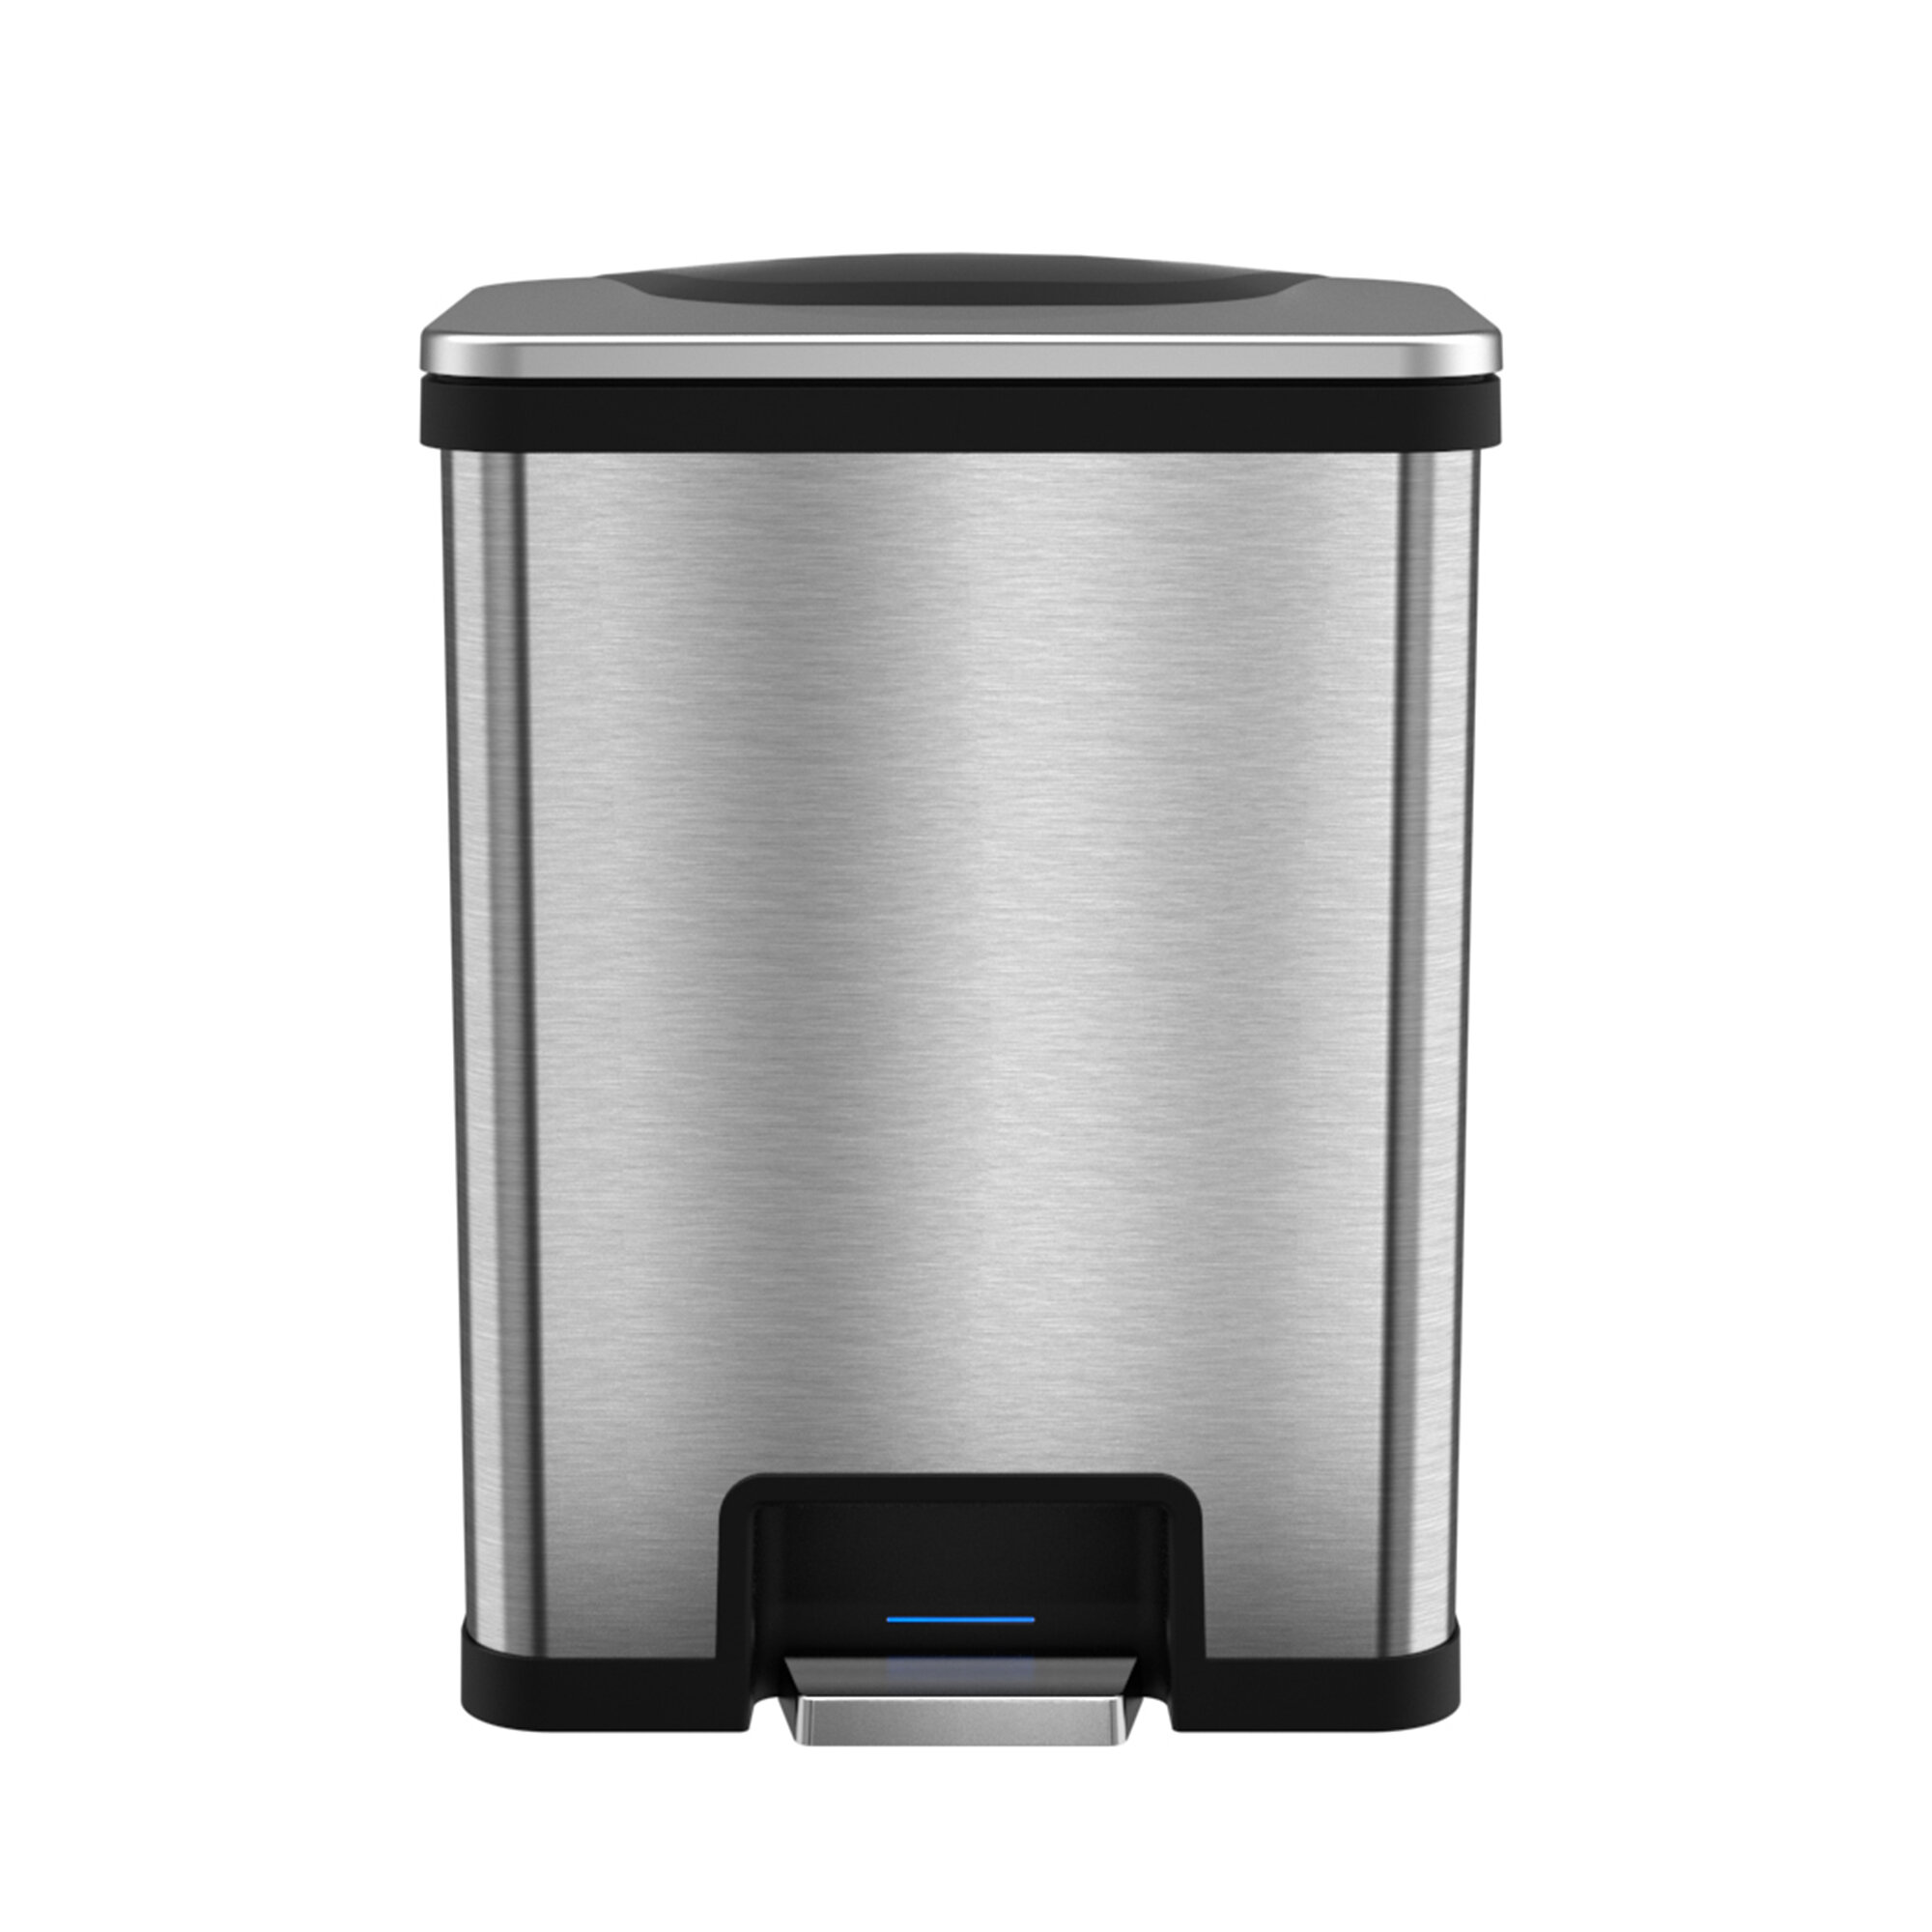 Itouchless 13 Gallon Automatic Step Sensor Trash Can With Odor Control System Stainless Steel Kitchen Pedal Touchless Garbage Bin Powered By Batteries Or Ac Adapter Not Included Autostep Red Wayfair